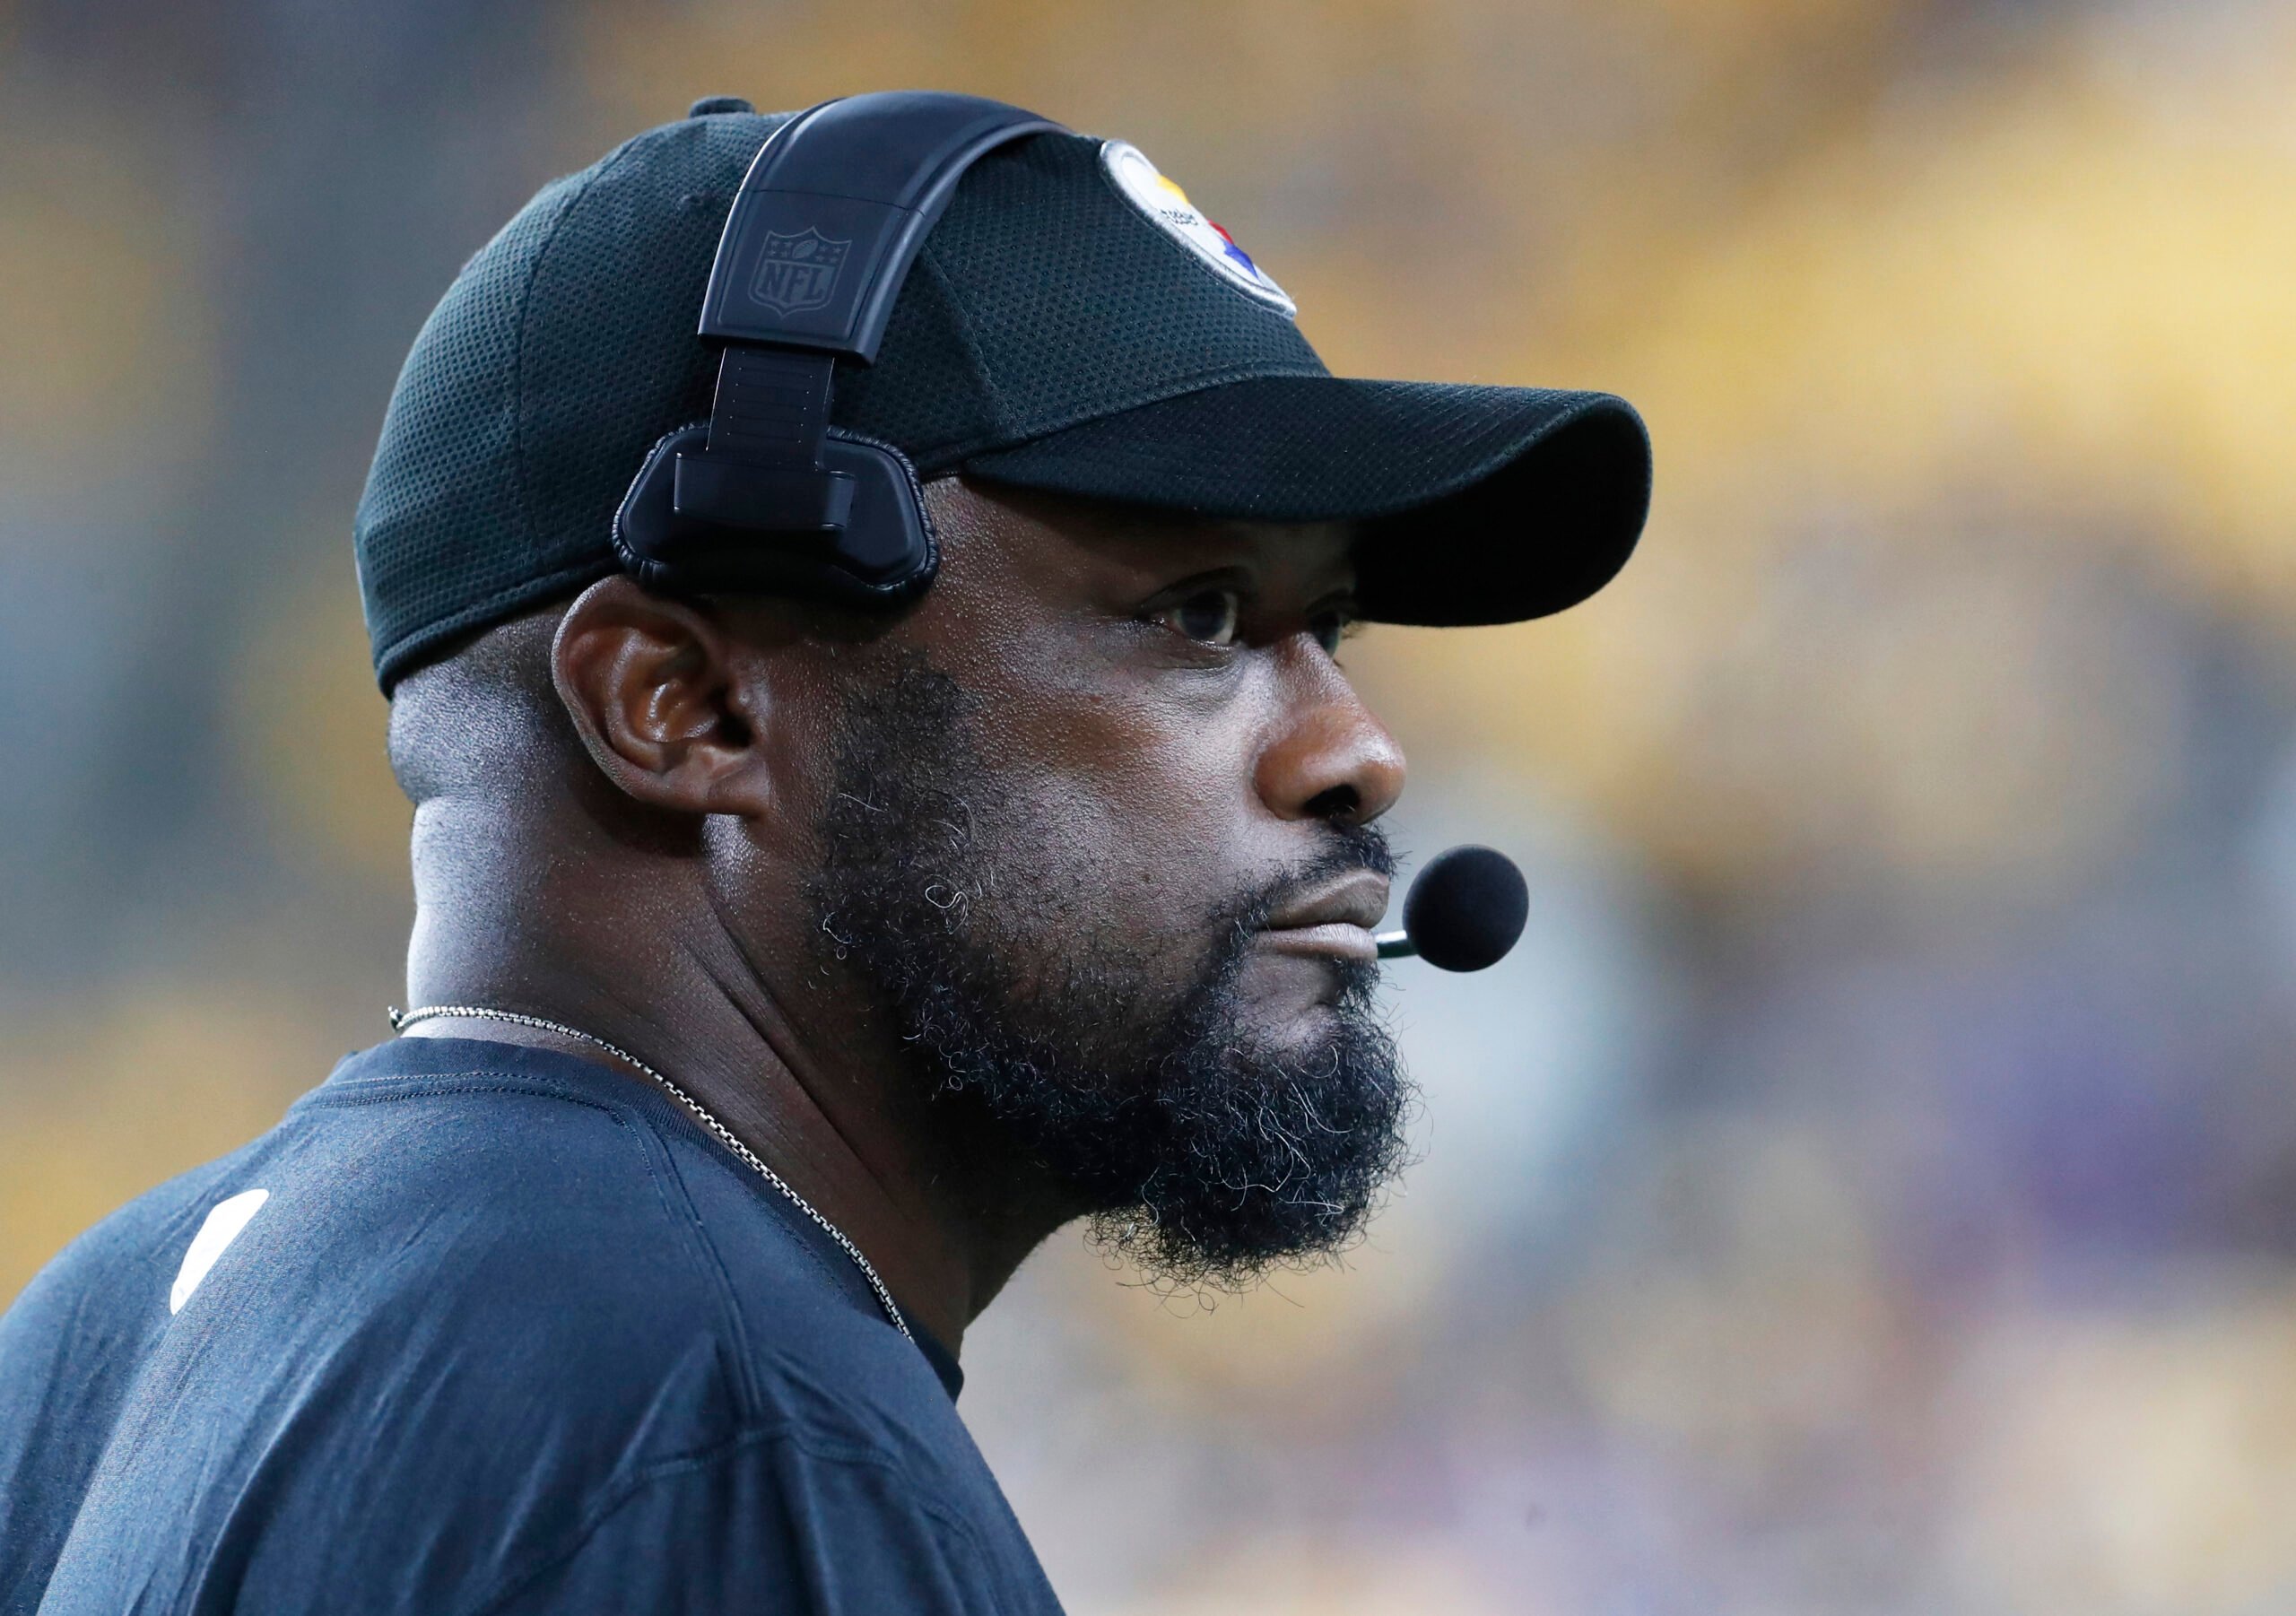 Who Is the Pittsburgh Steelers Head Coach?